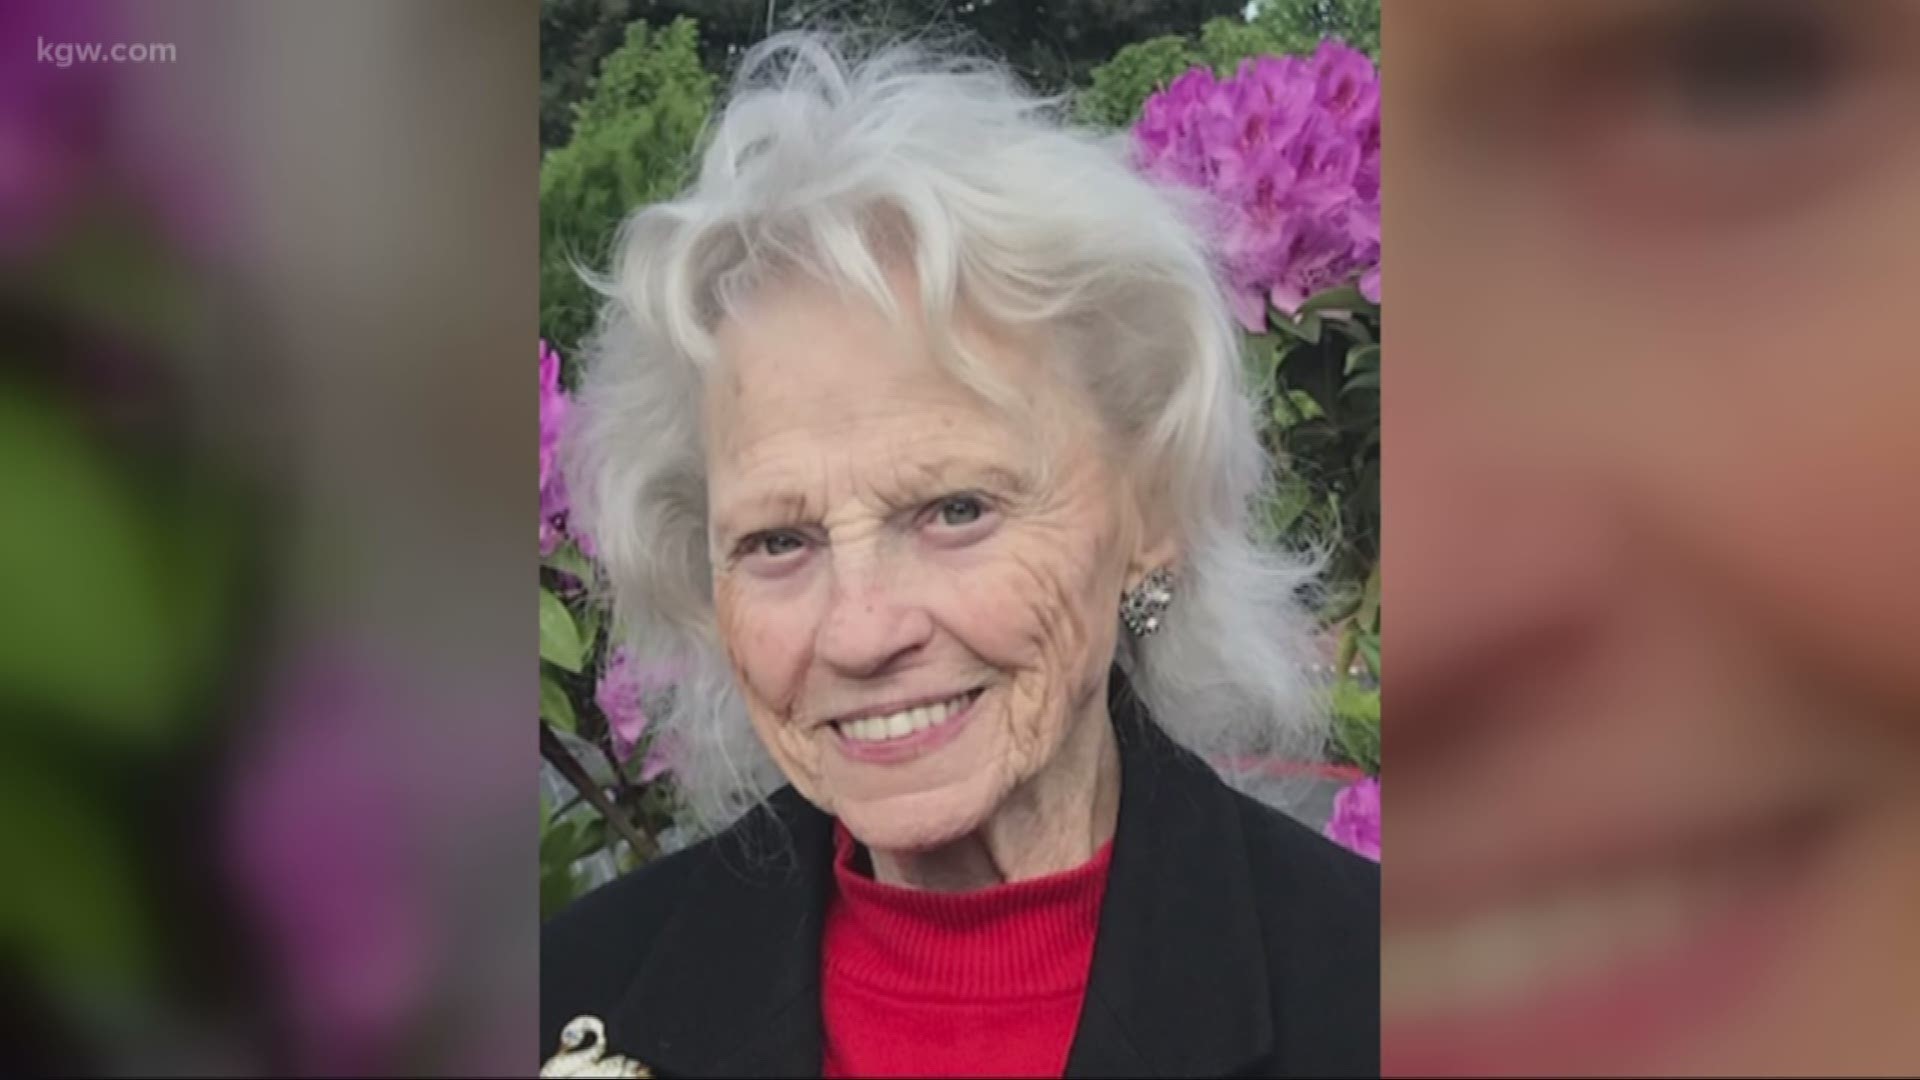 Suspect tortured, sexually abused, killed 89-year-old Marcine Herinck, indictment says